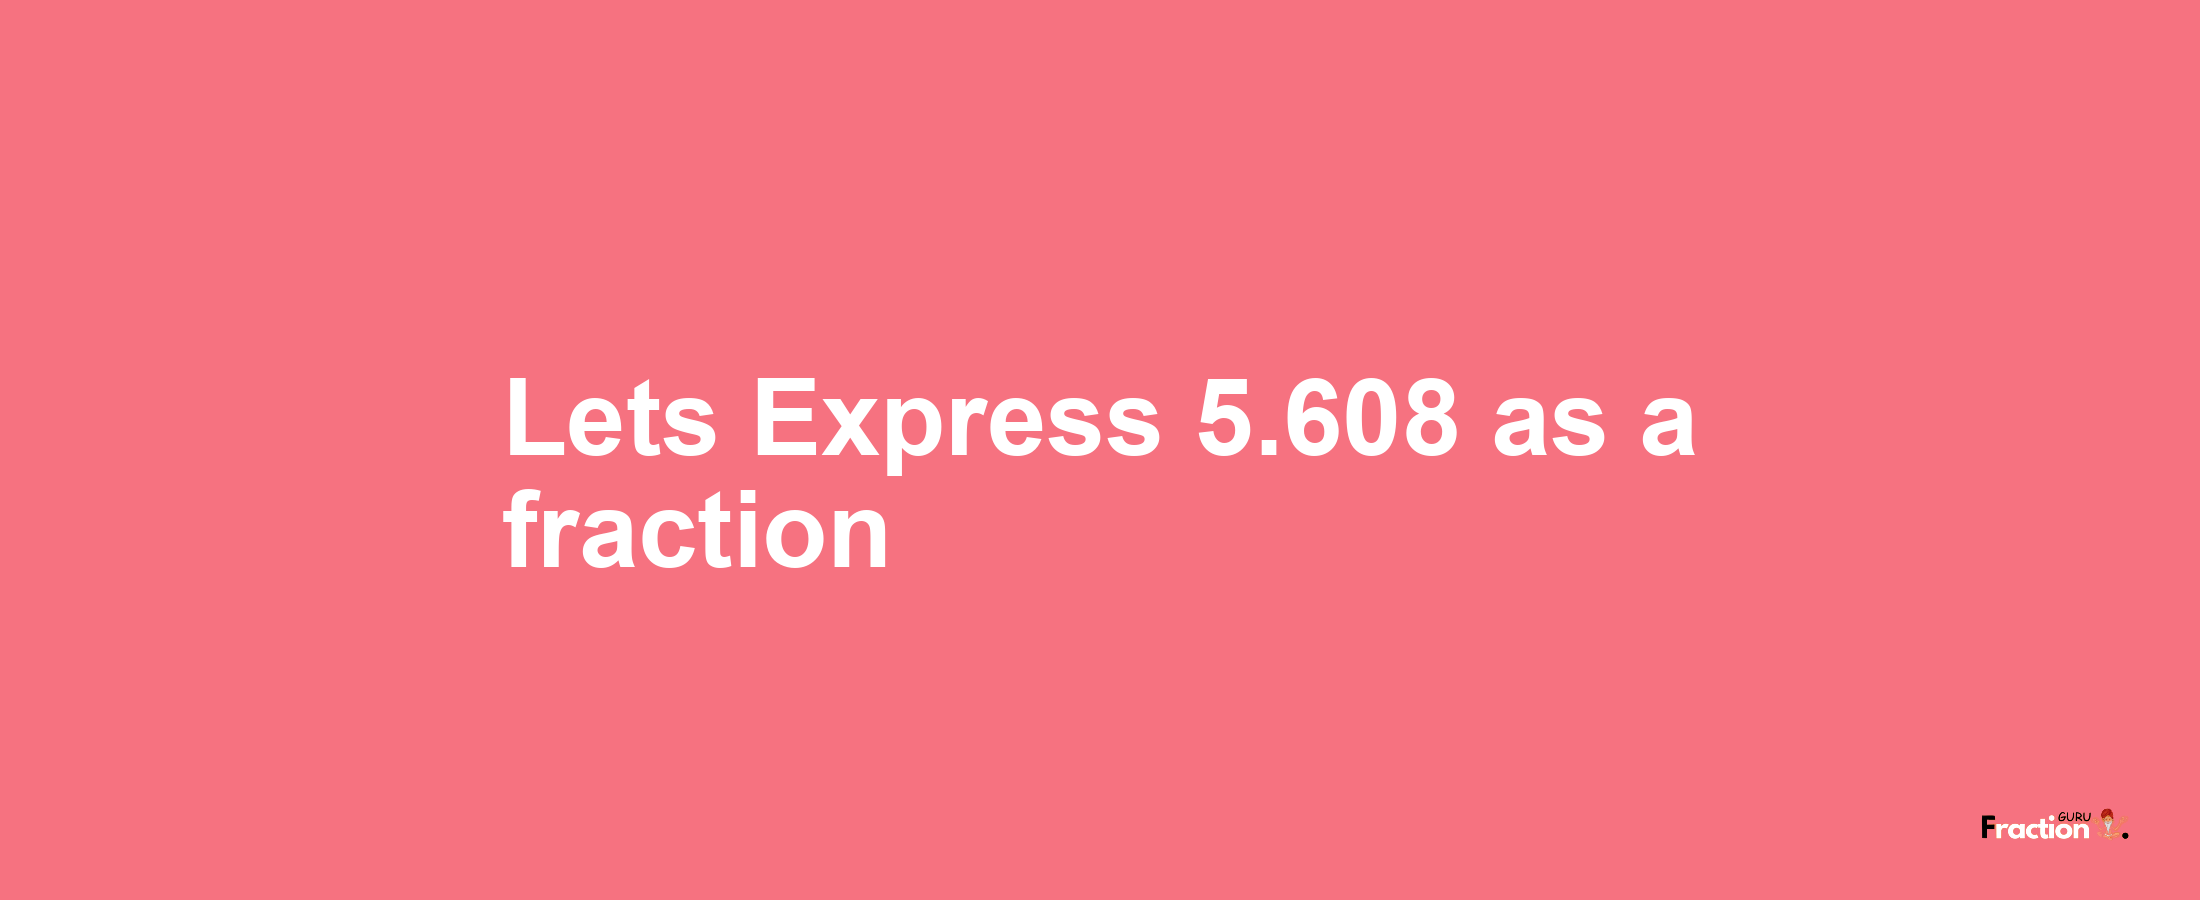 Lets Express 5.608 as afraction